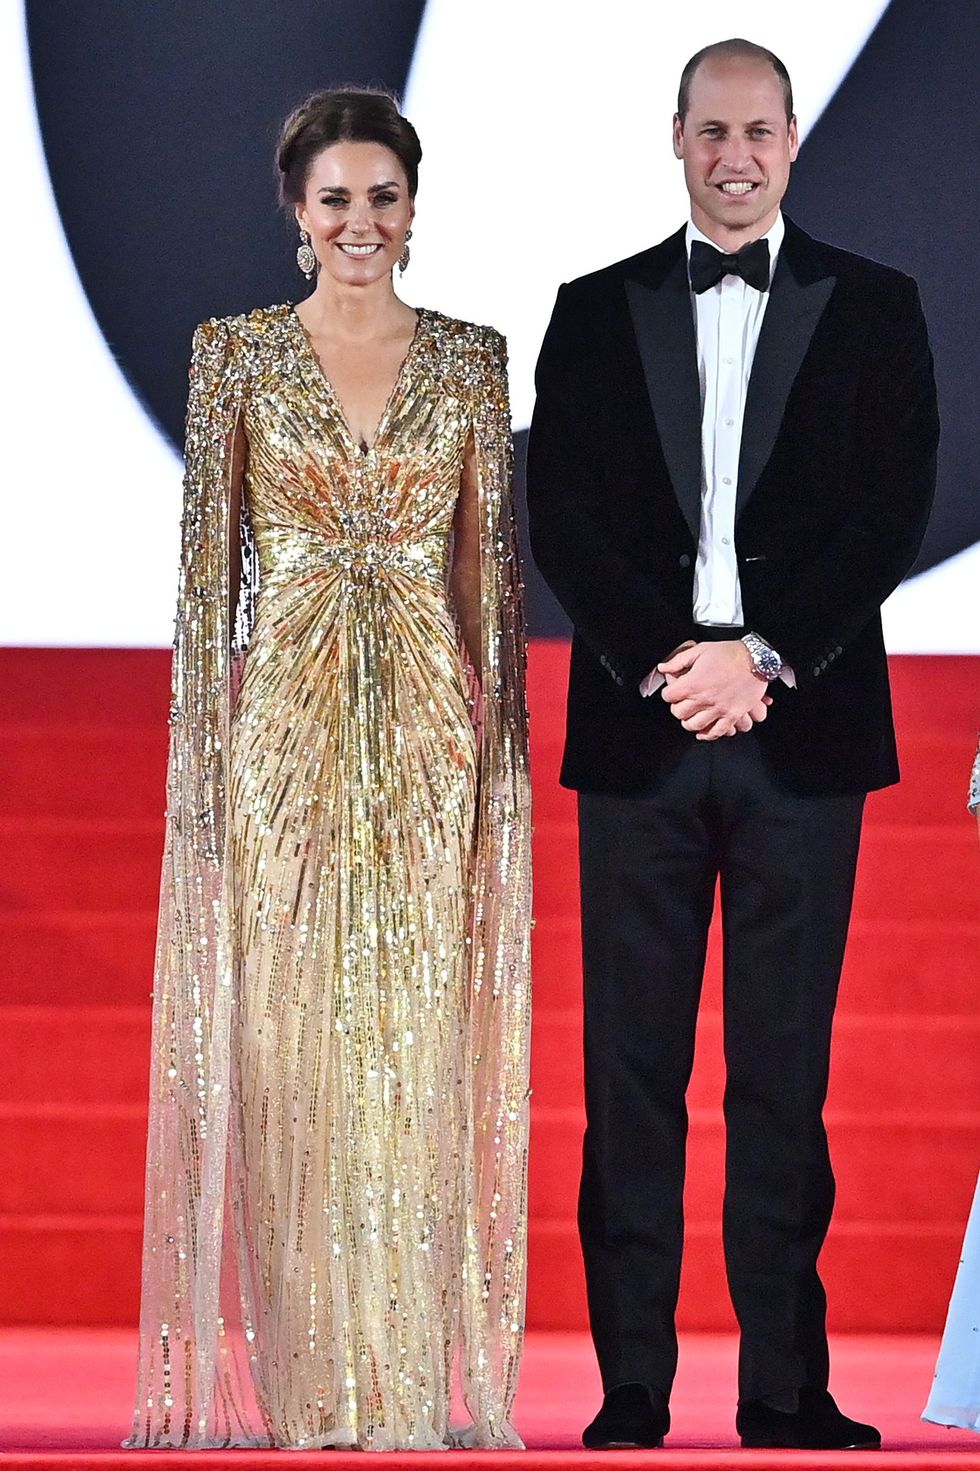 Kate Middleton Attends No Time to Die Premiere in Gold Sequin Gown